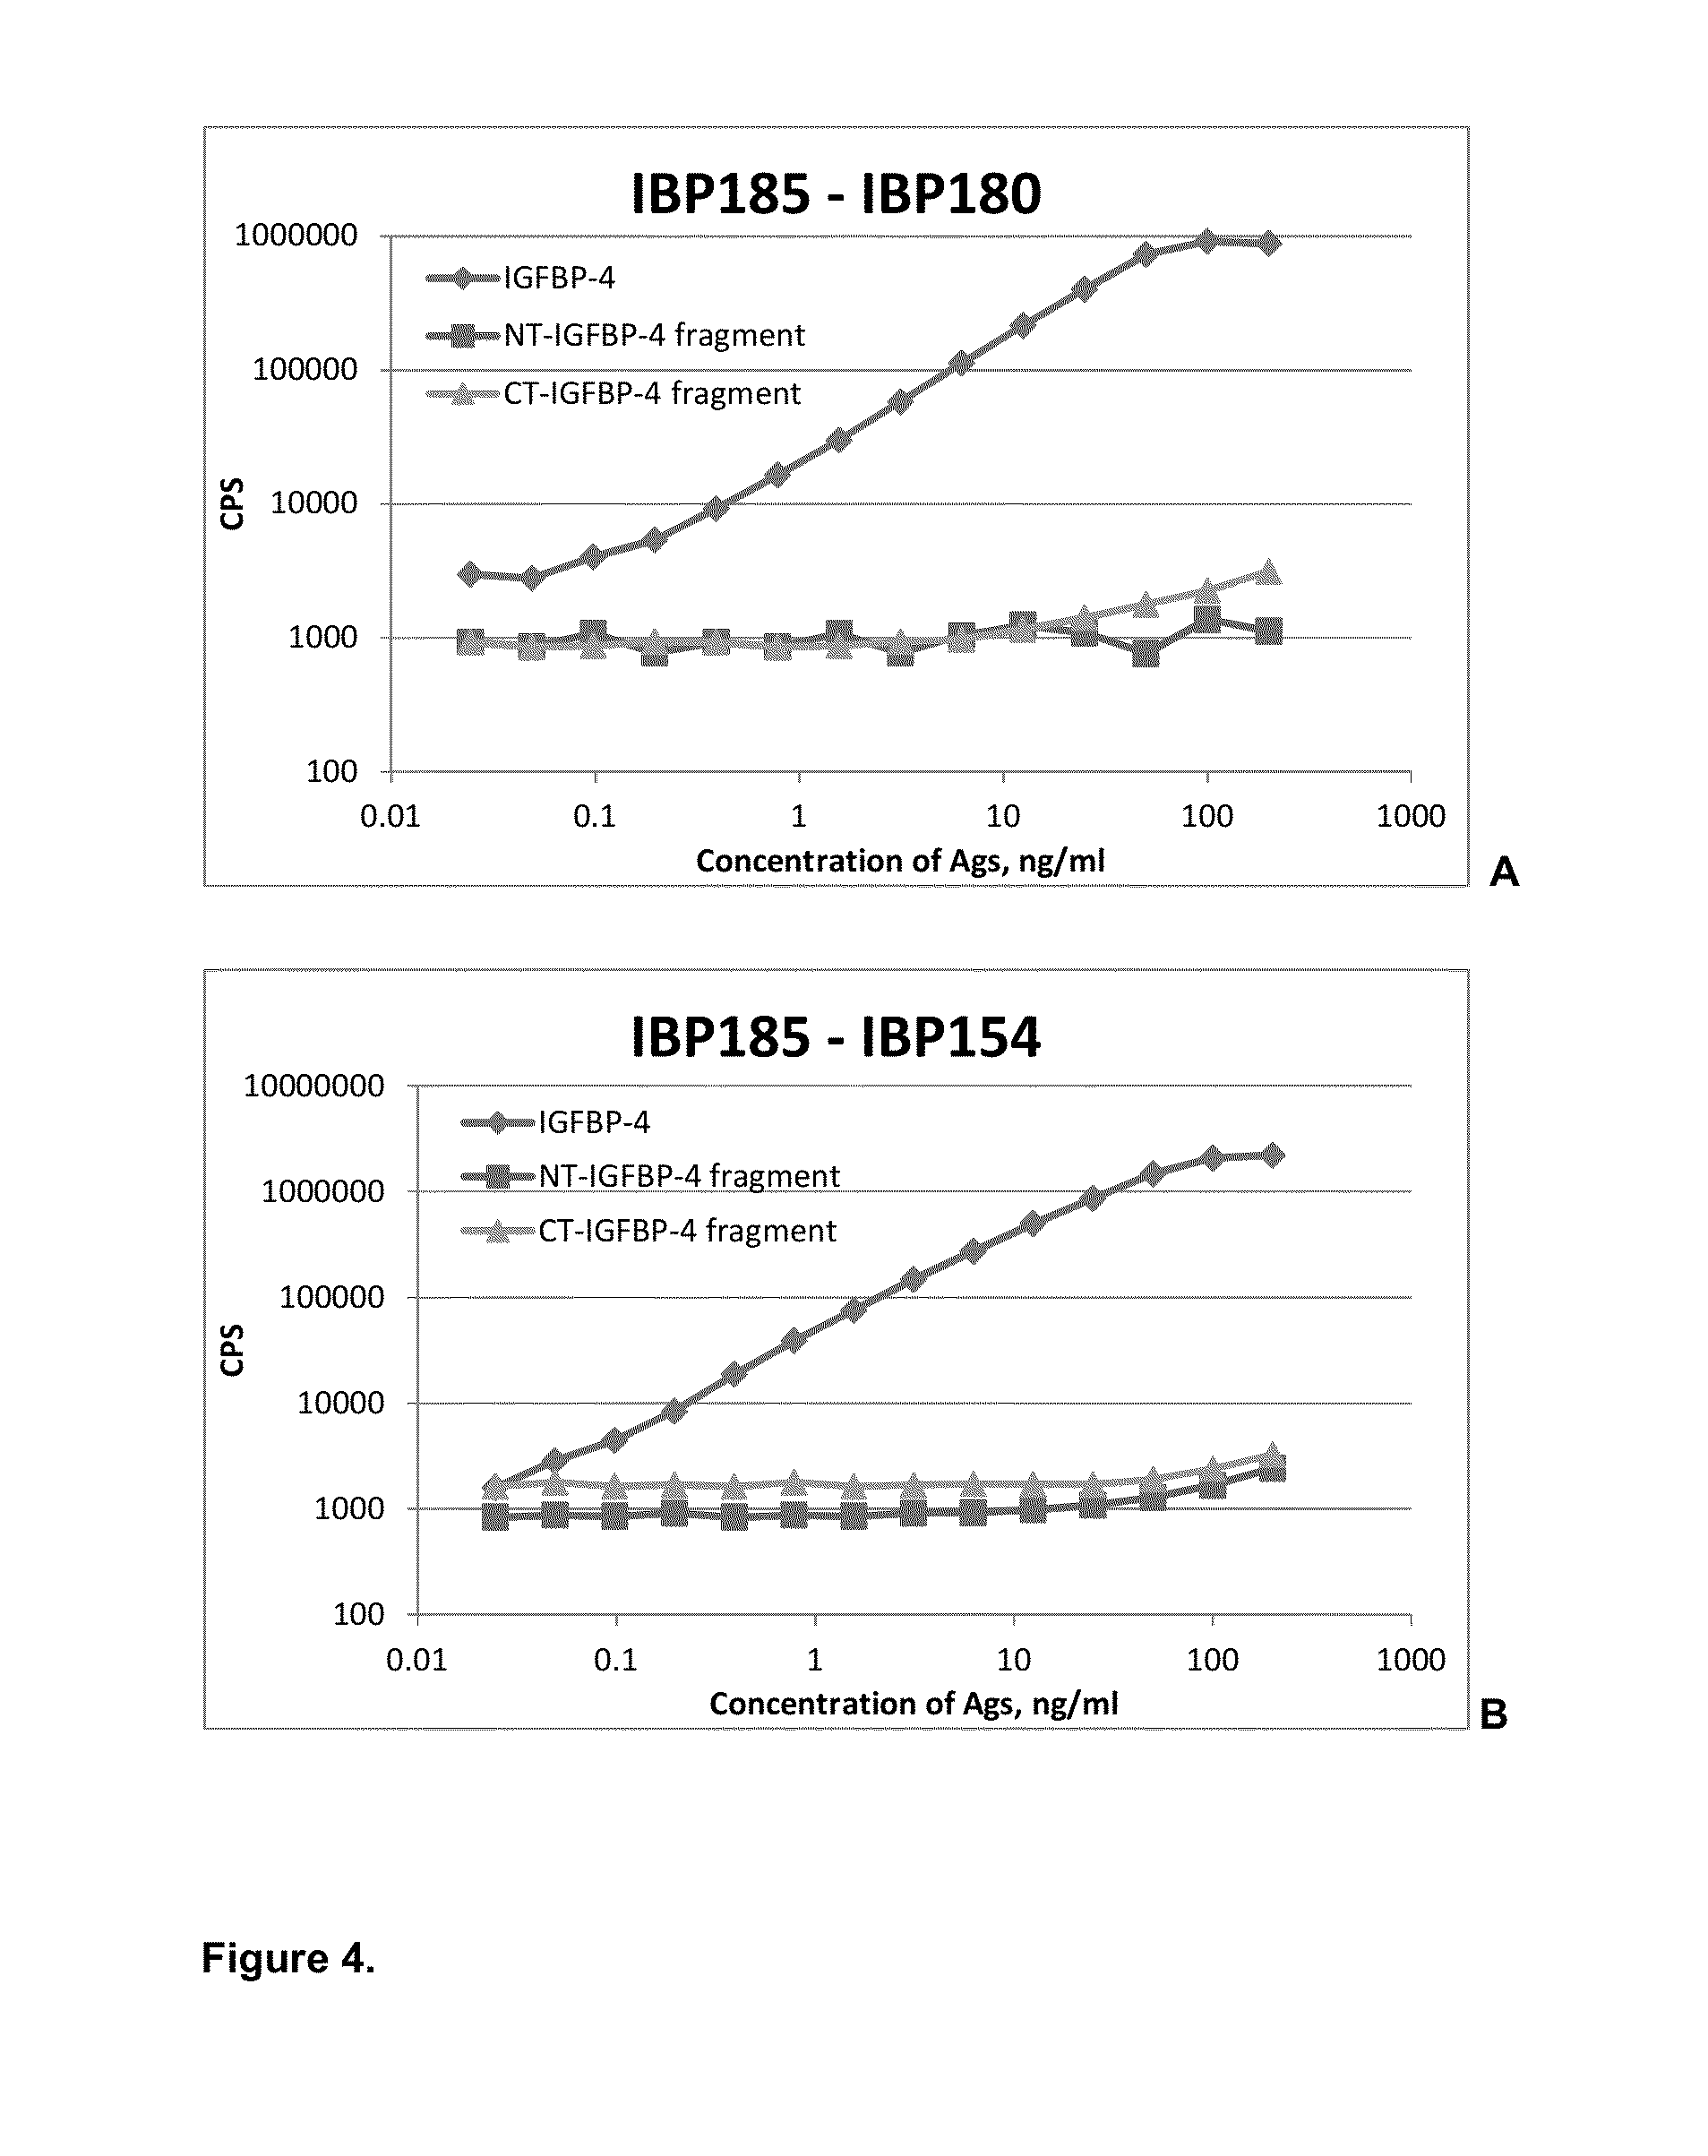 Method for determining the risk of cardiovascular events using igfbp fragments